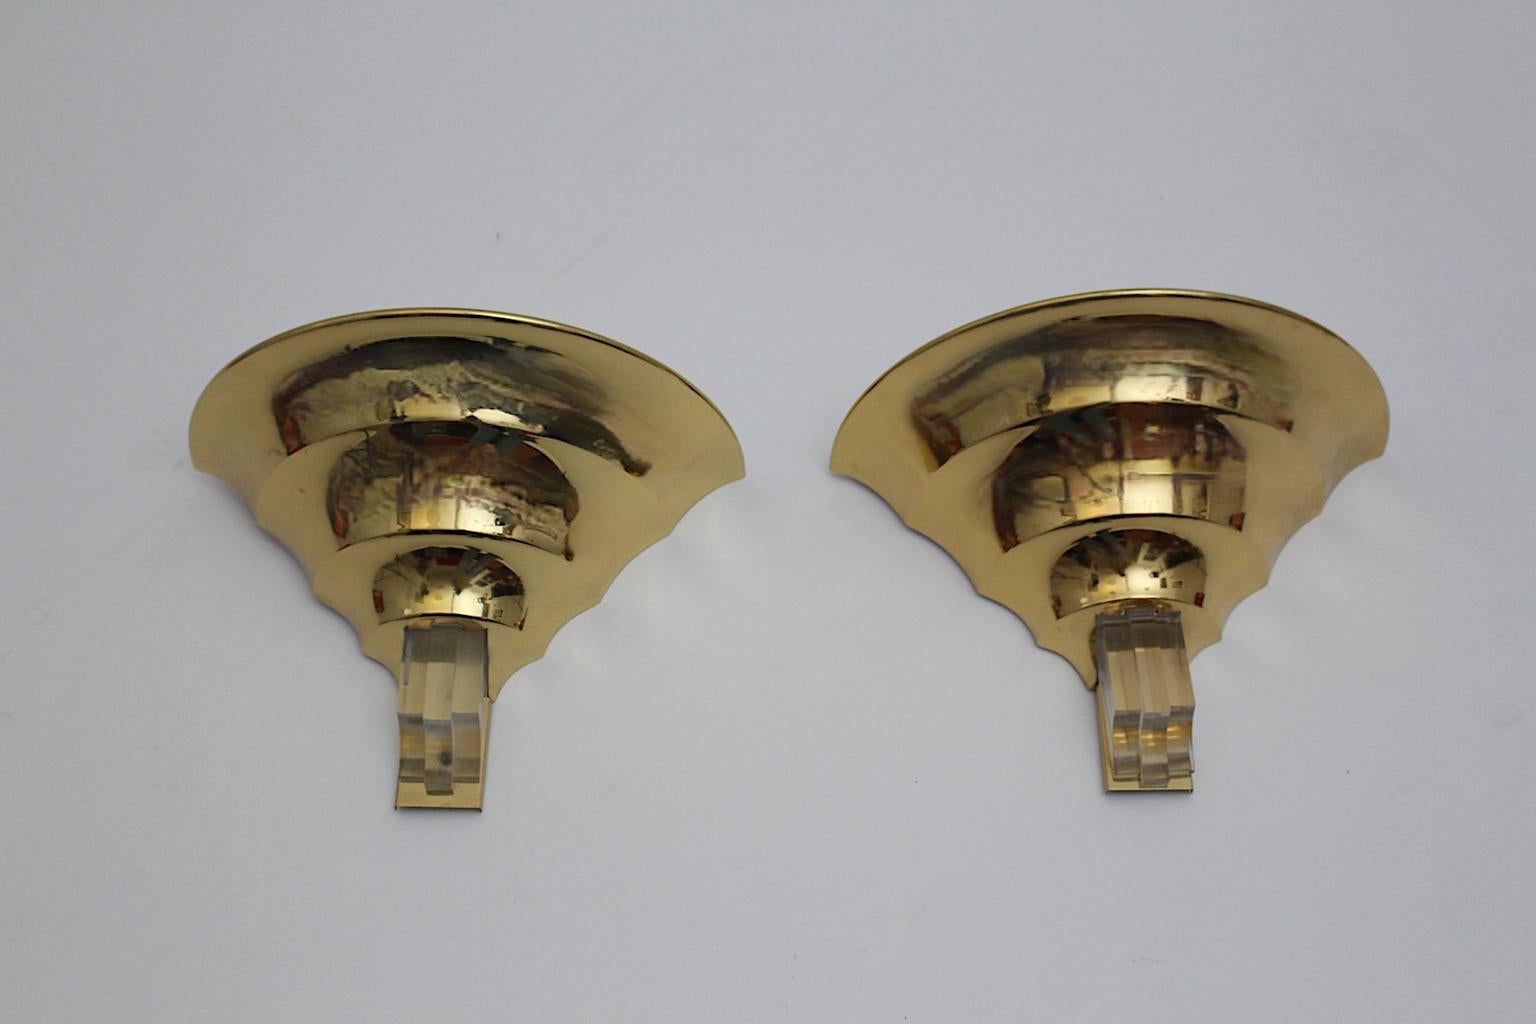 Metal Art Deco Style Vintage Brass Lucite Sconces Wall Lights Duo Pair 1980s Italy For Sale